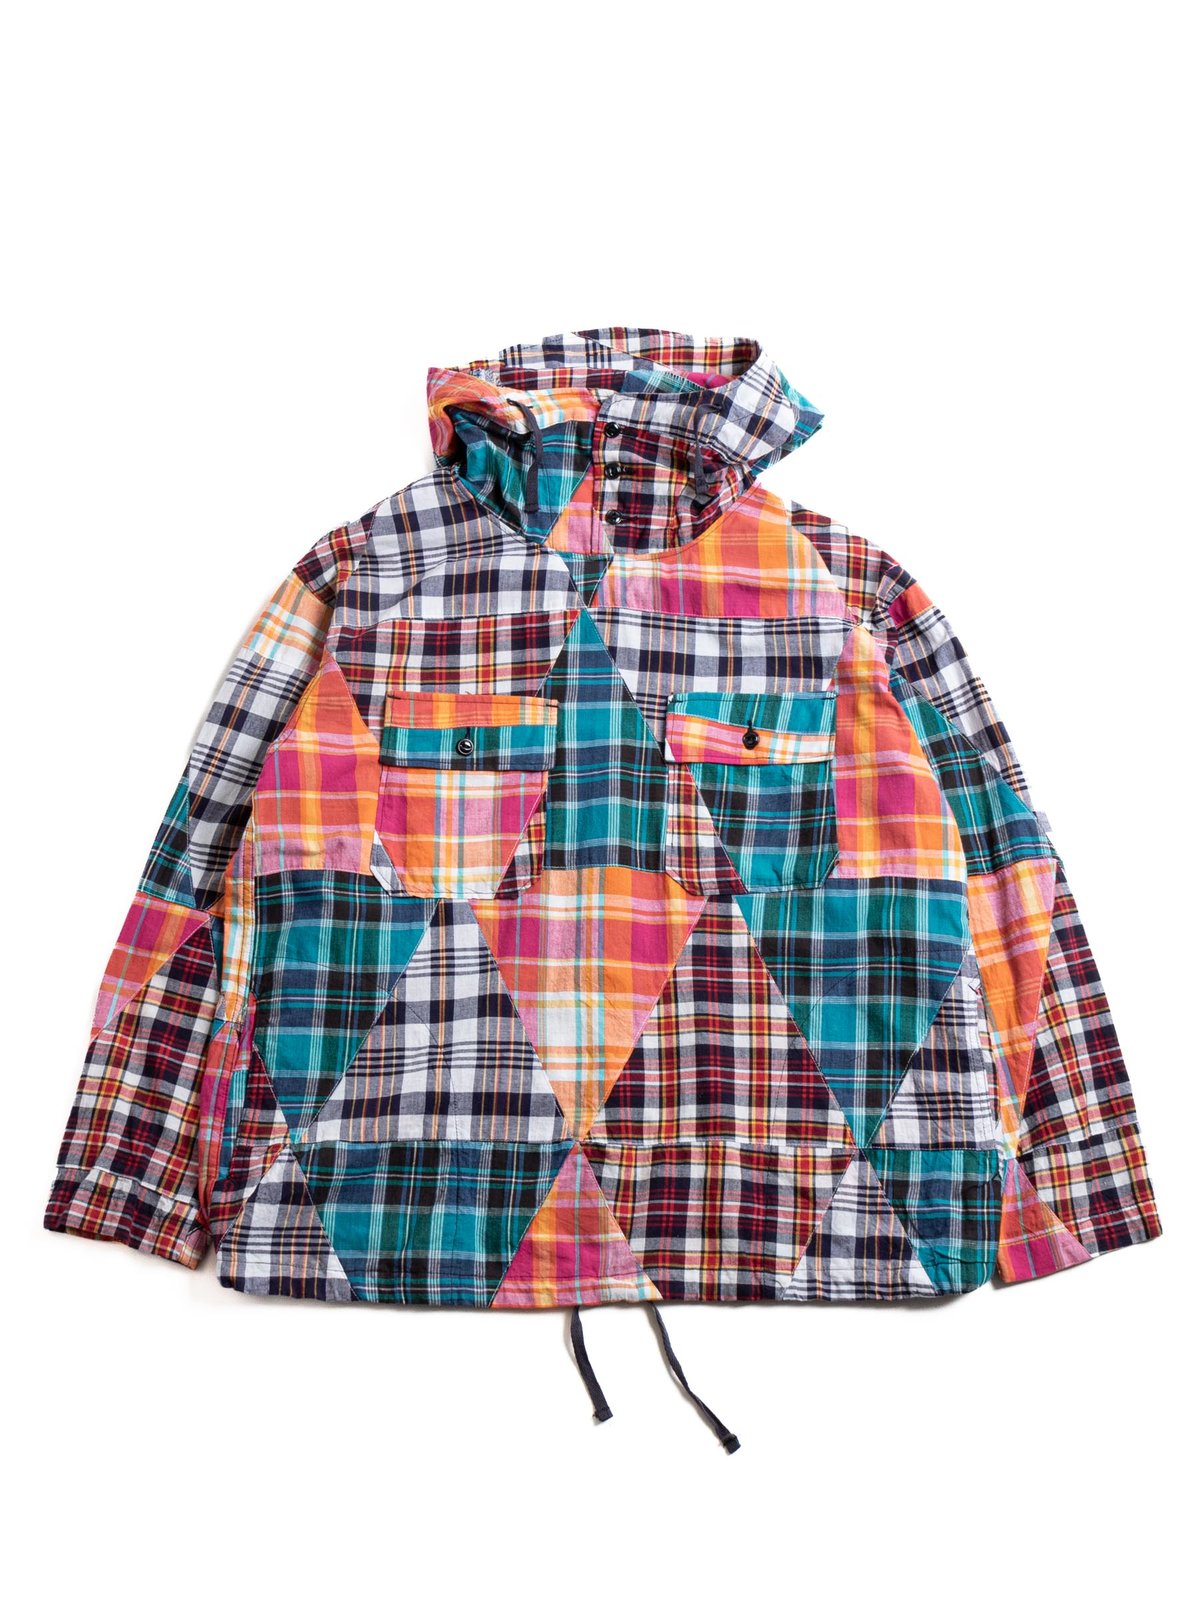 CAGOULE SHIRT MULTI COLOR TRIANGLE PATCHWORK - Image 1